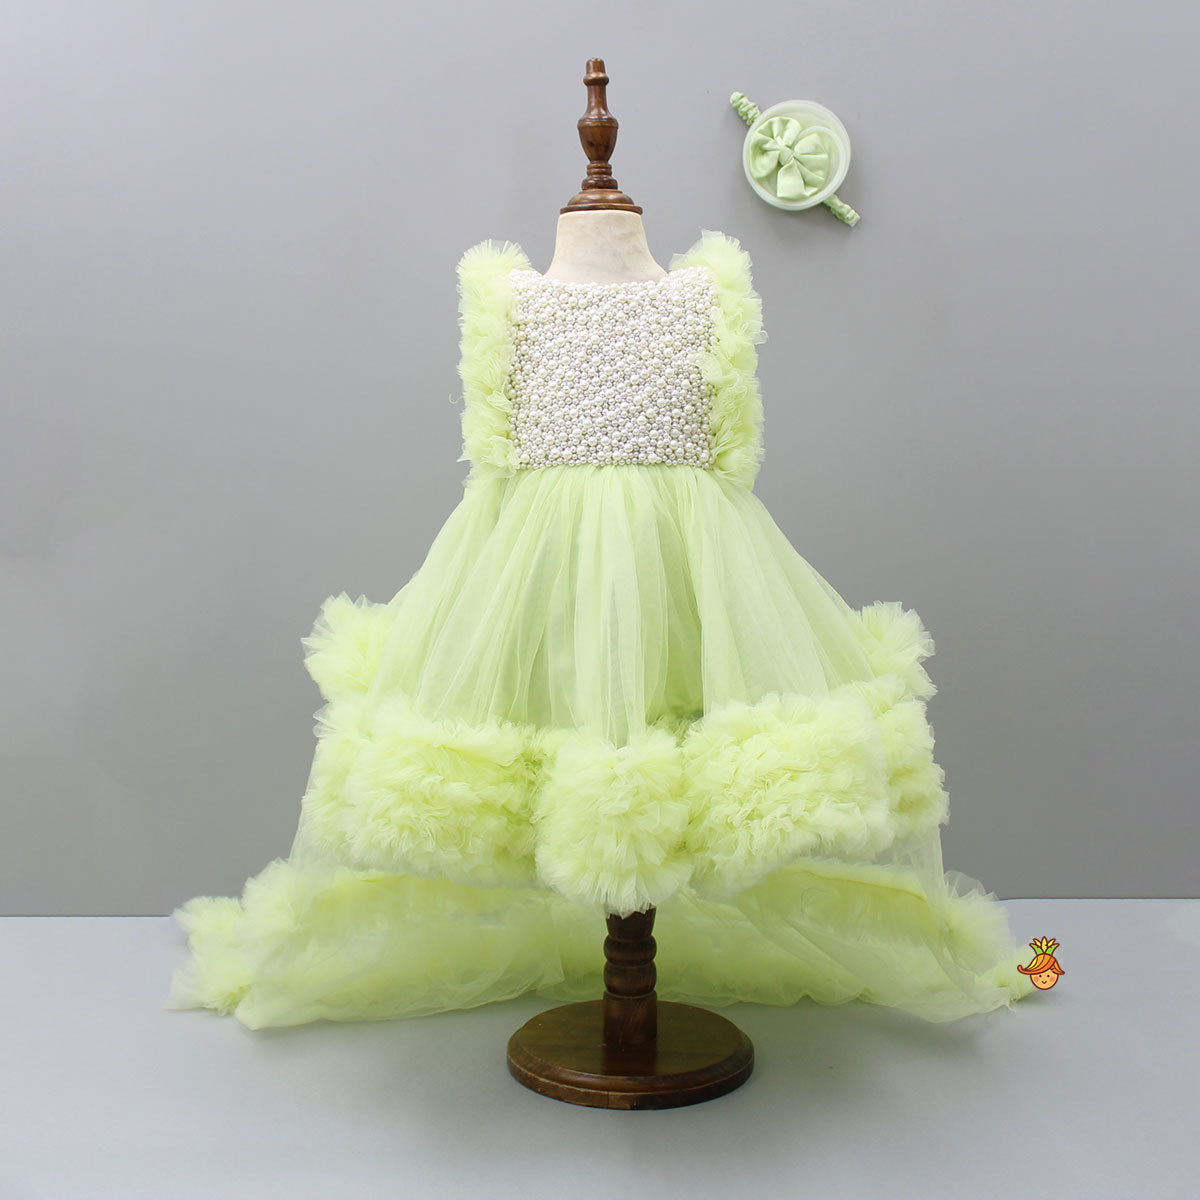 Embroidered Yoke Ruffle Hem Green Dress With Detachable Trail And Matching Head Band